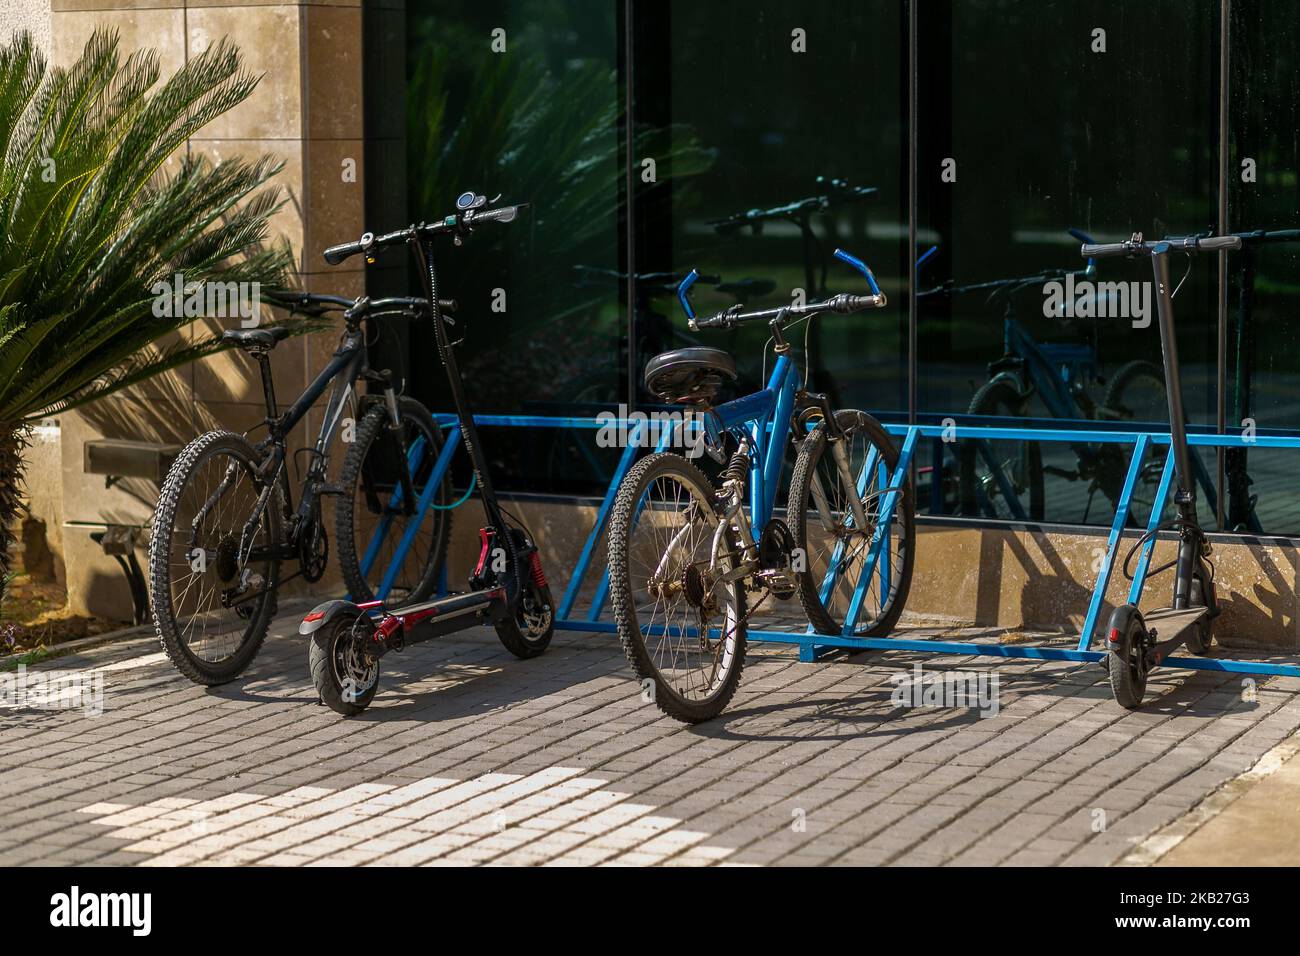 Bicycle parking in the school yard. Stock Photo